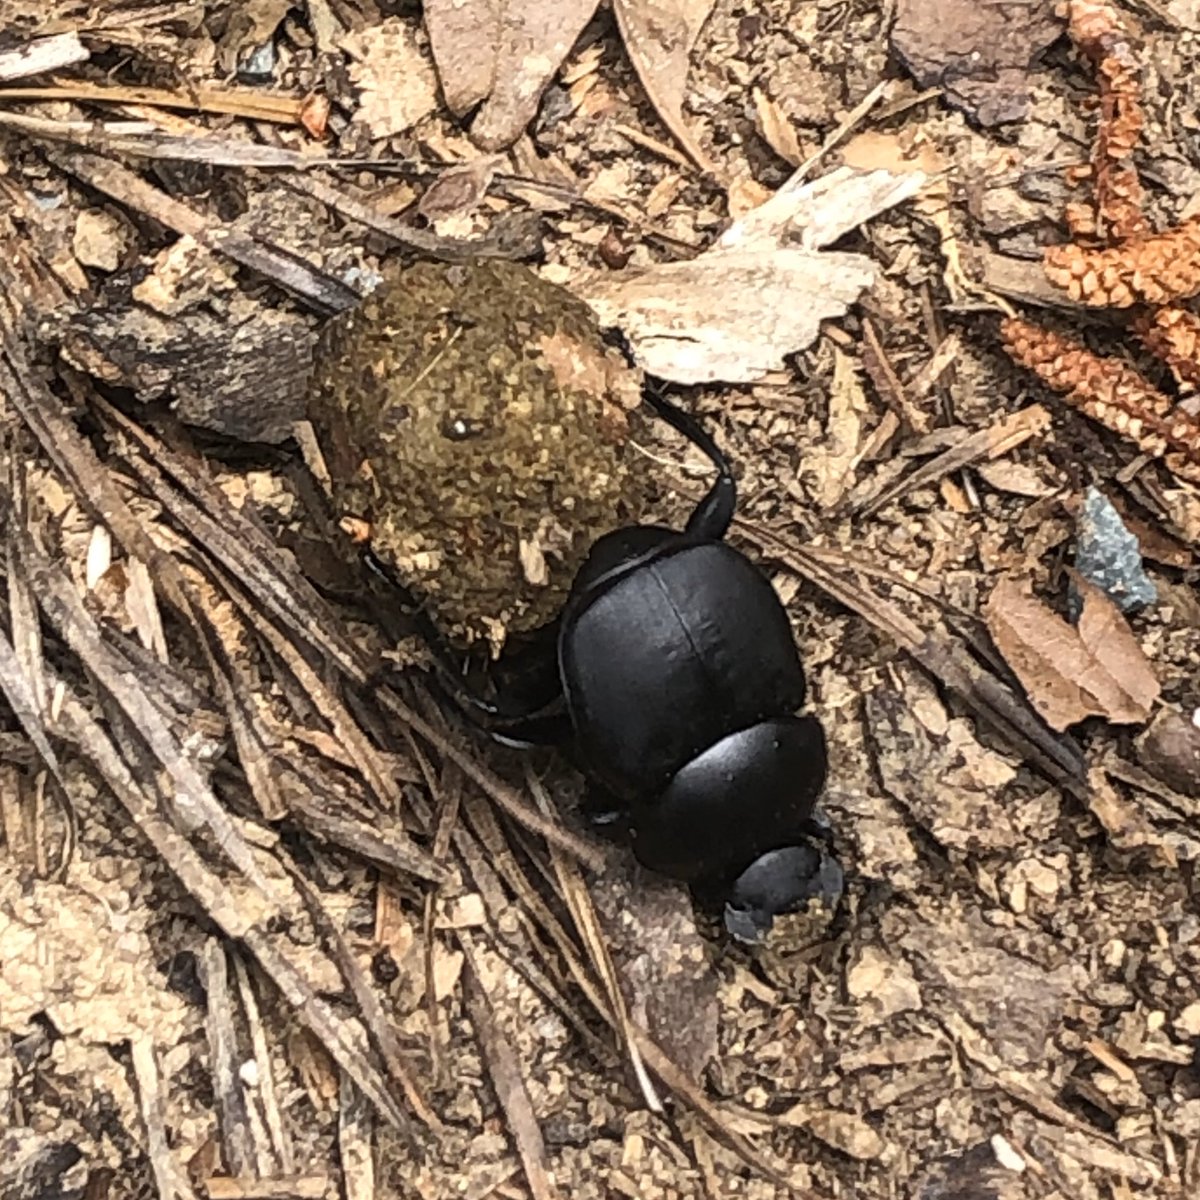 IT’S A DUNG BEETLE!!!